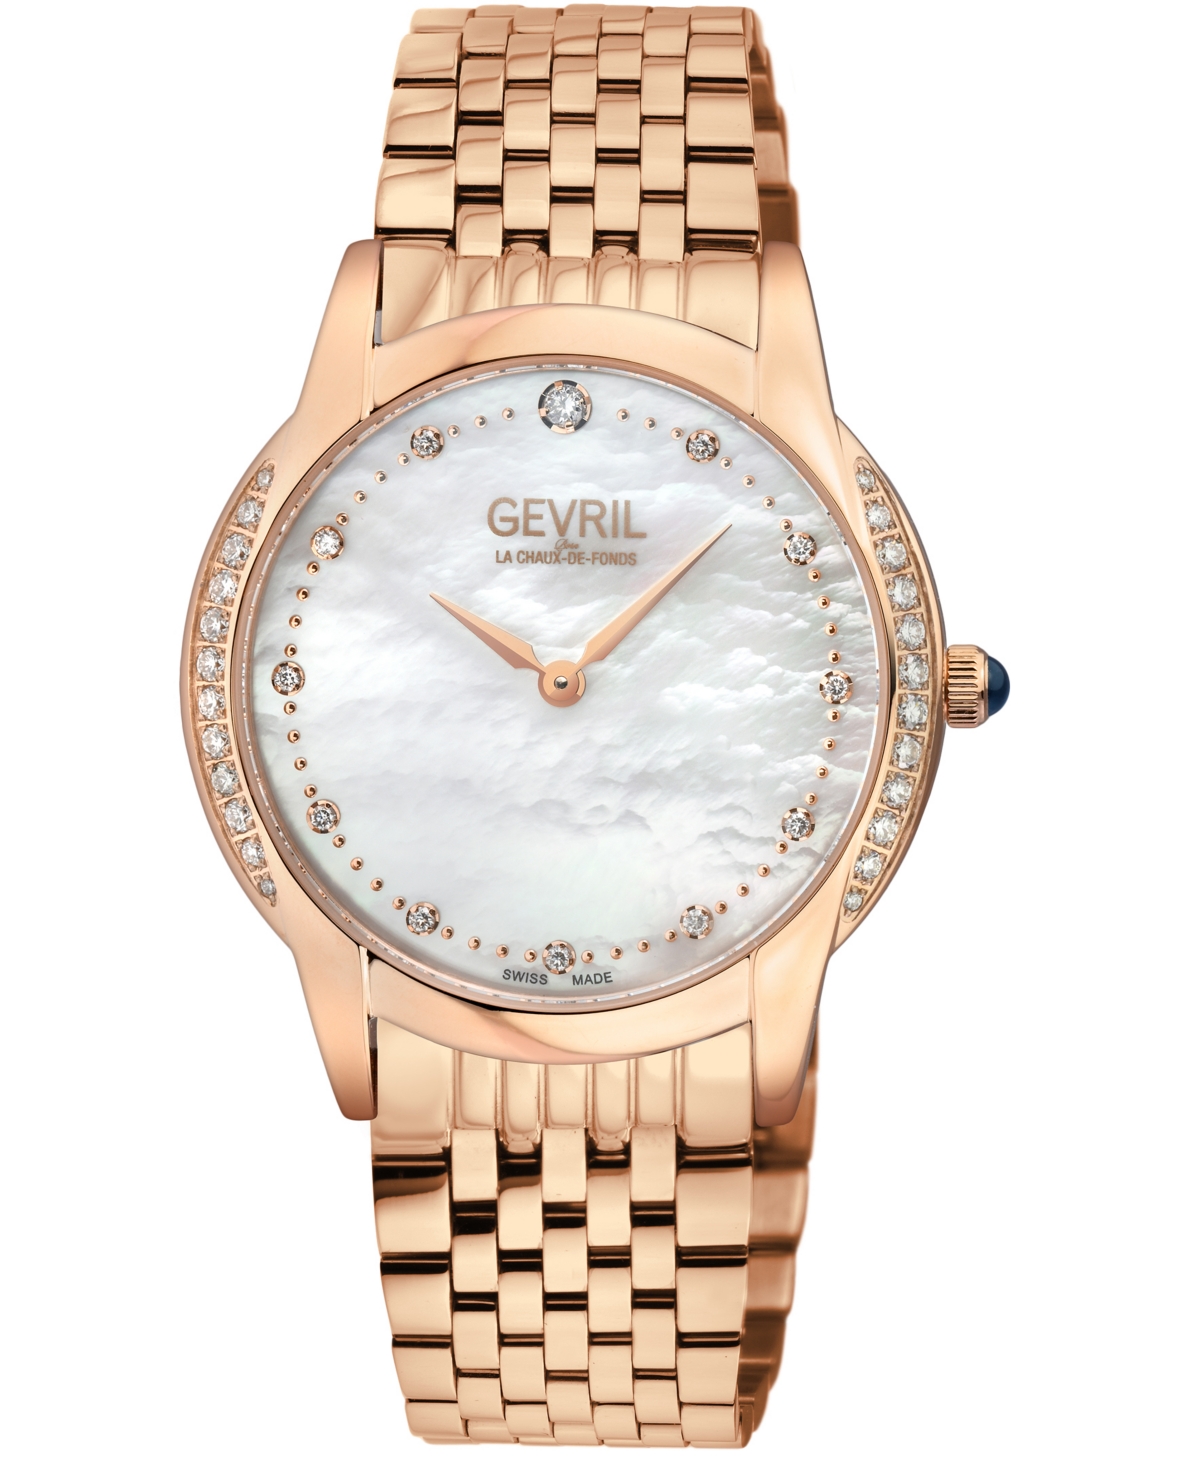 Gevril Women's Airolo Rose Stainless Steel Watch 36mm